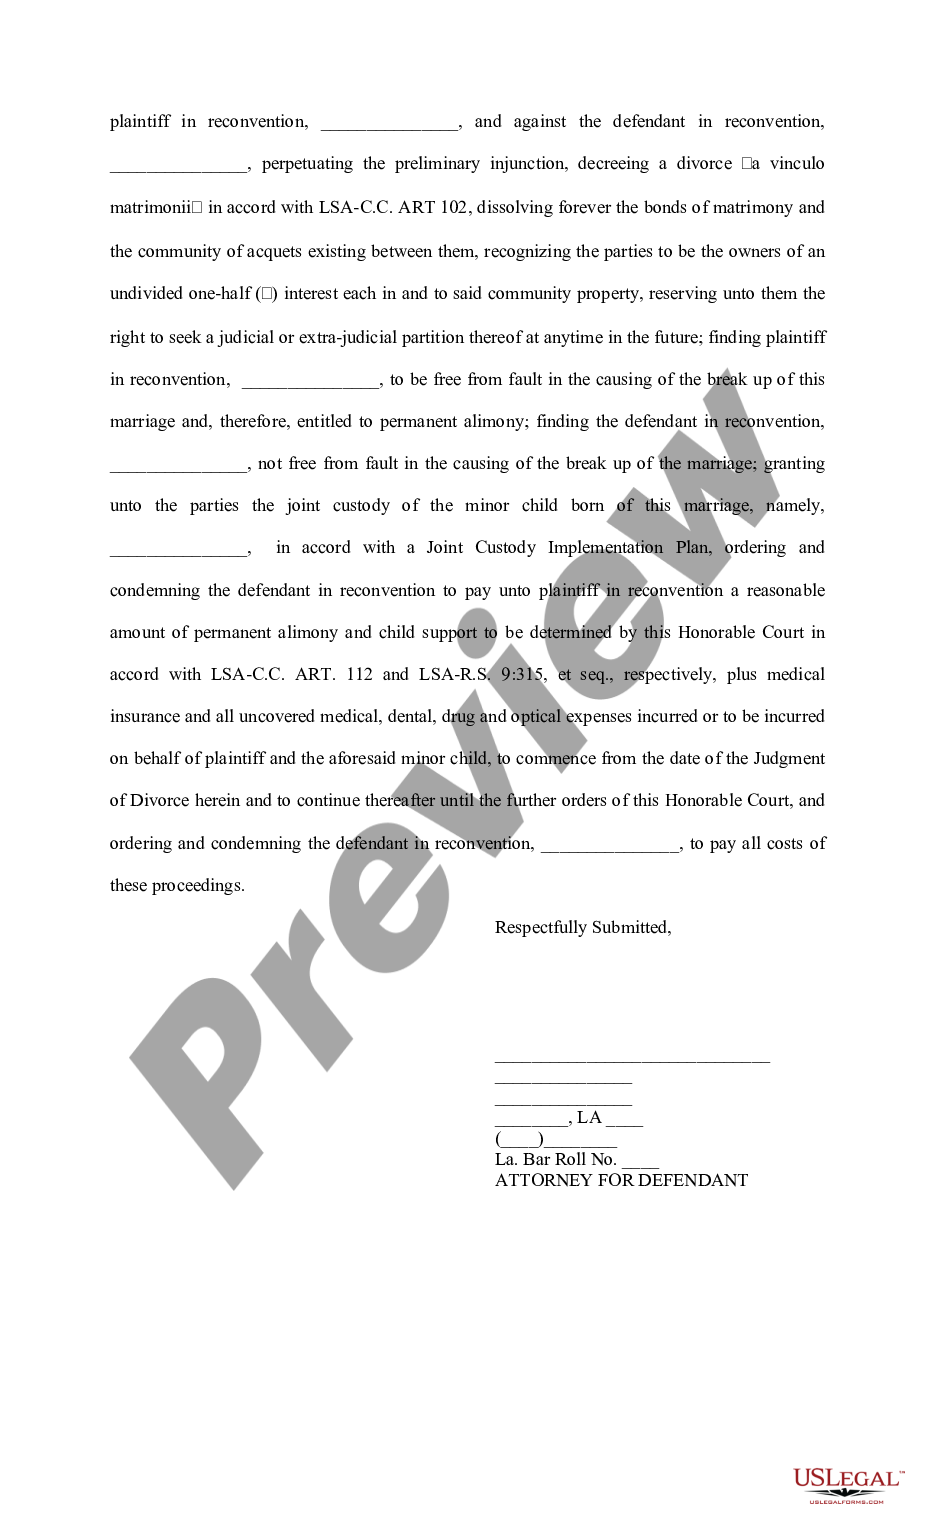 page 5 Answers to Original, First Amended, and Supplemental Petition and Reconventional Demand (Divorce) preview